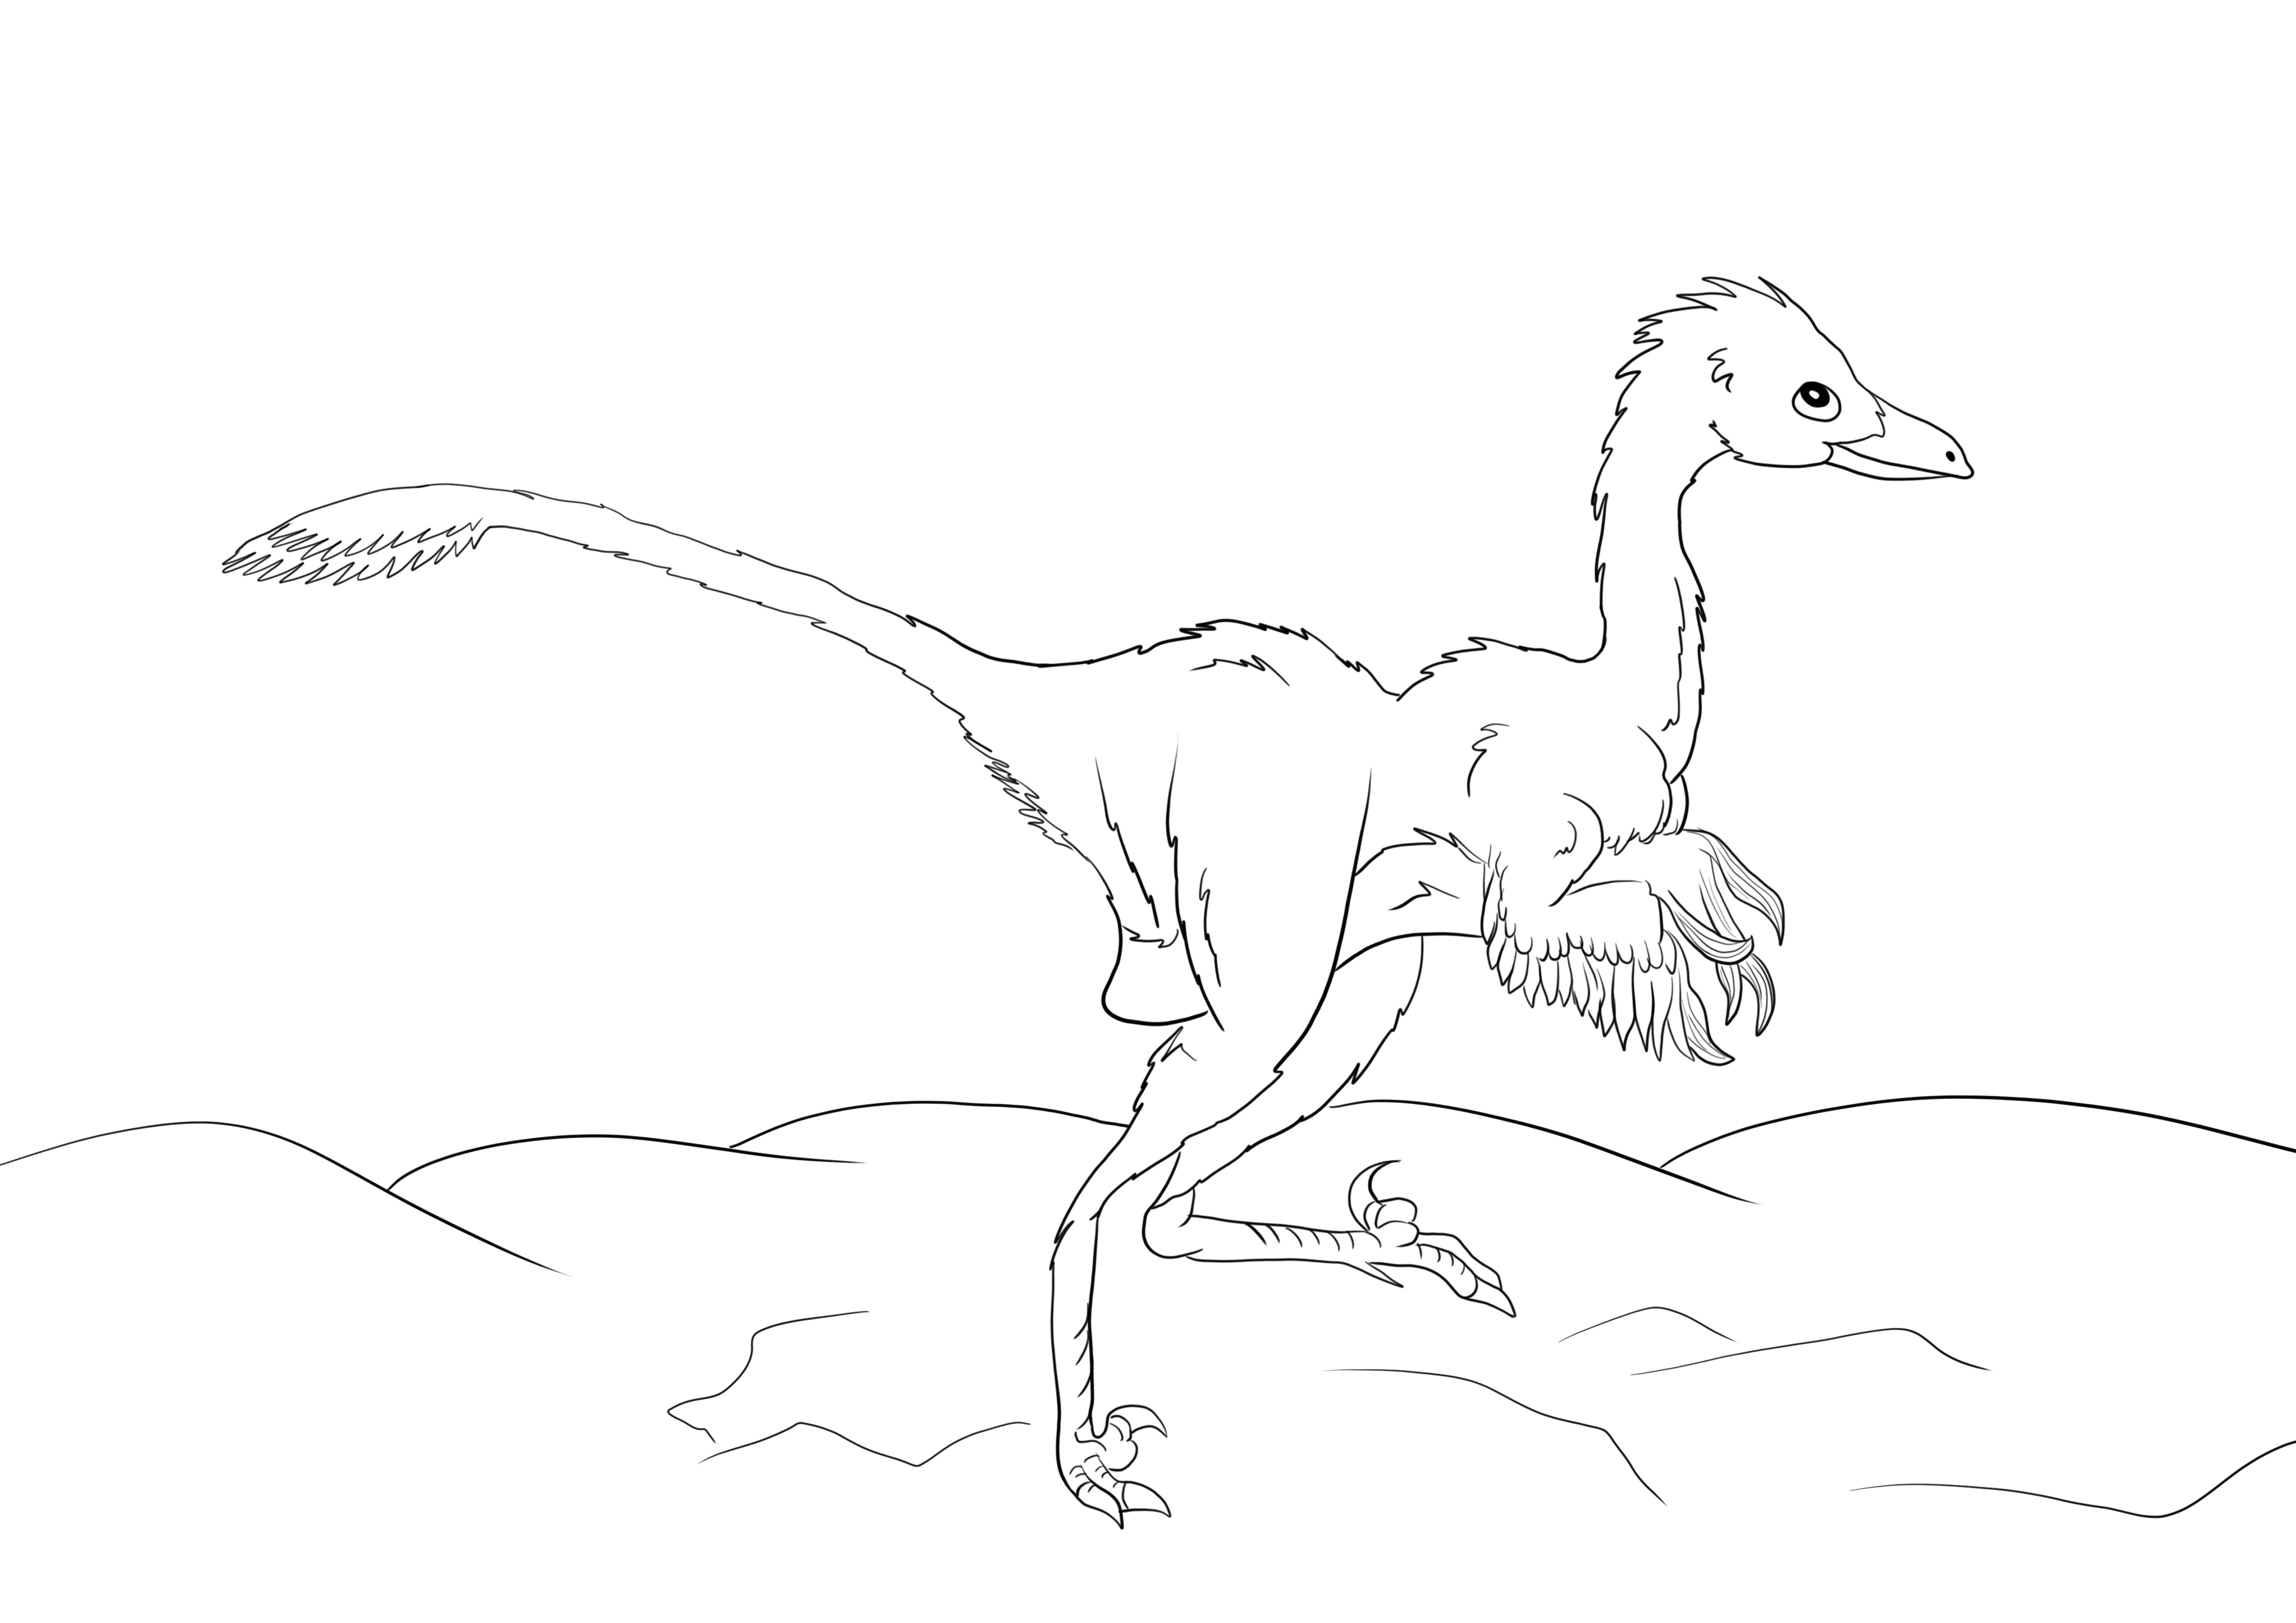 A free coloring page of a troodon dinosaur to print for free